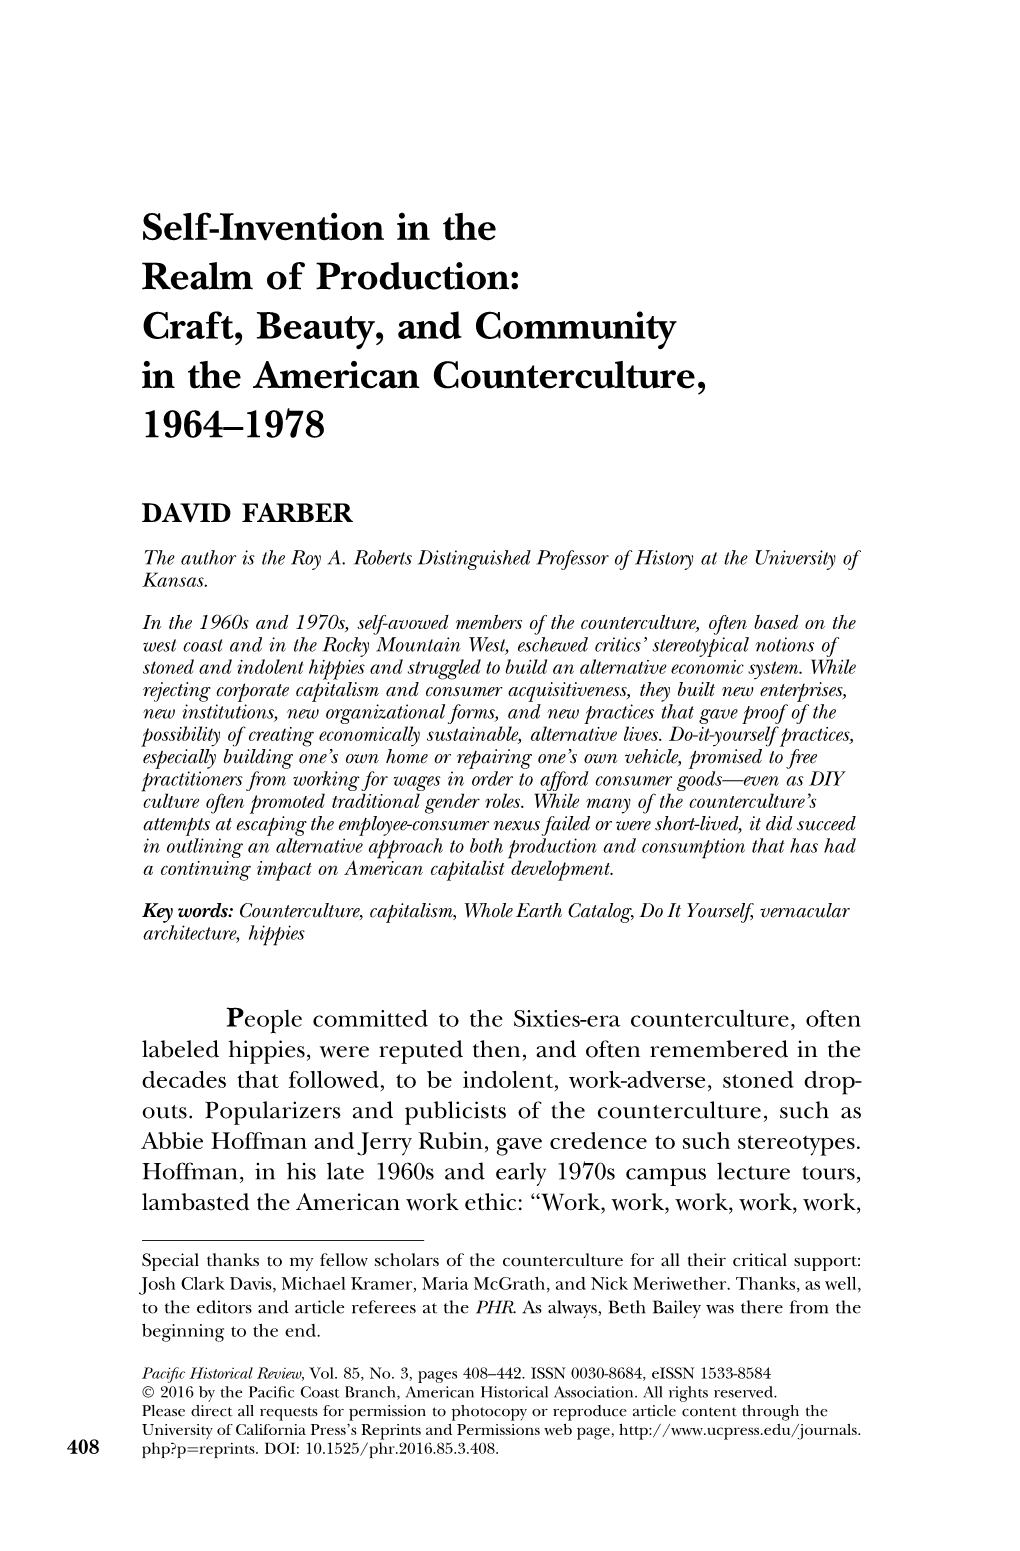 Self-Invention in the Realm of Production: Craft, Beauty, and Community in the American Counterculture, 1964–1978